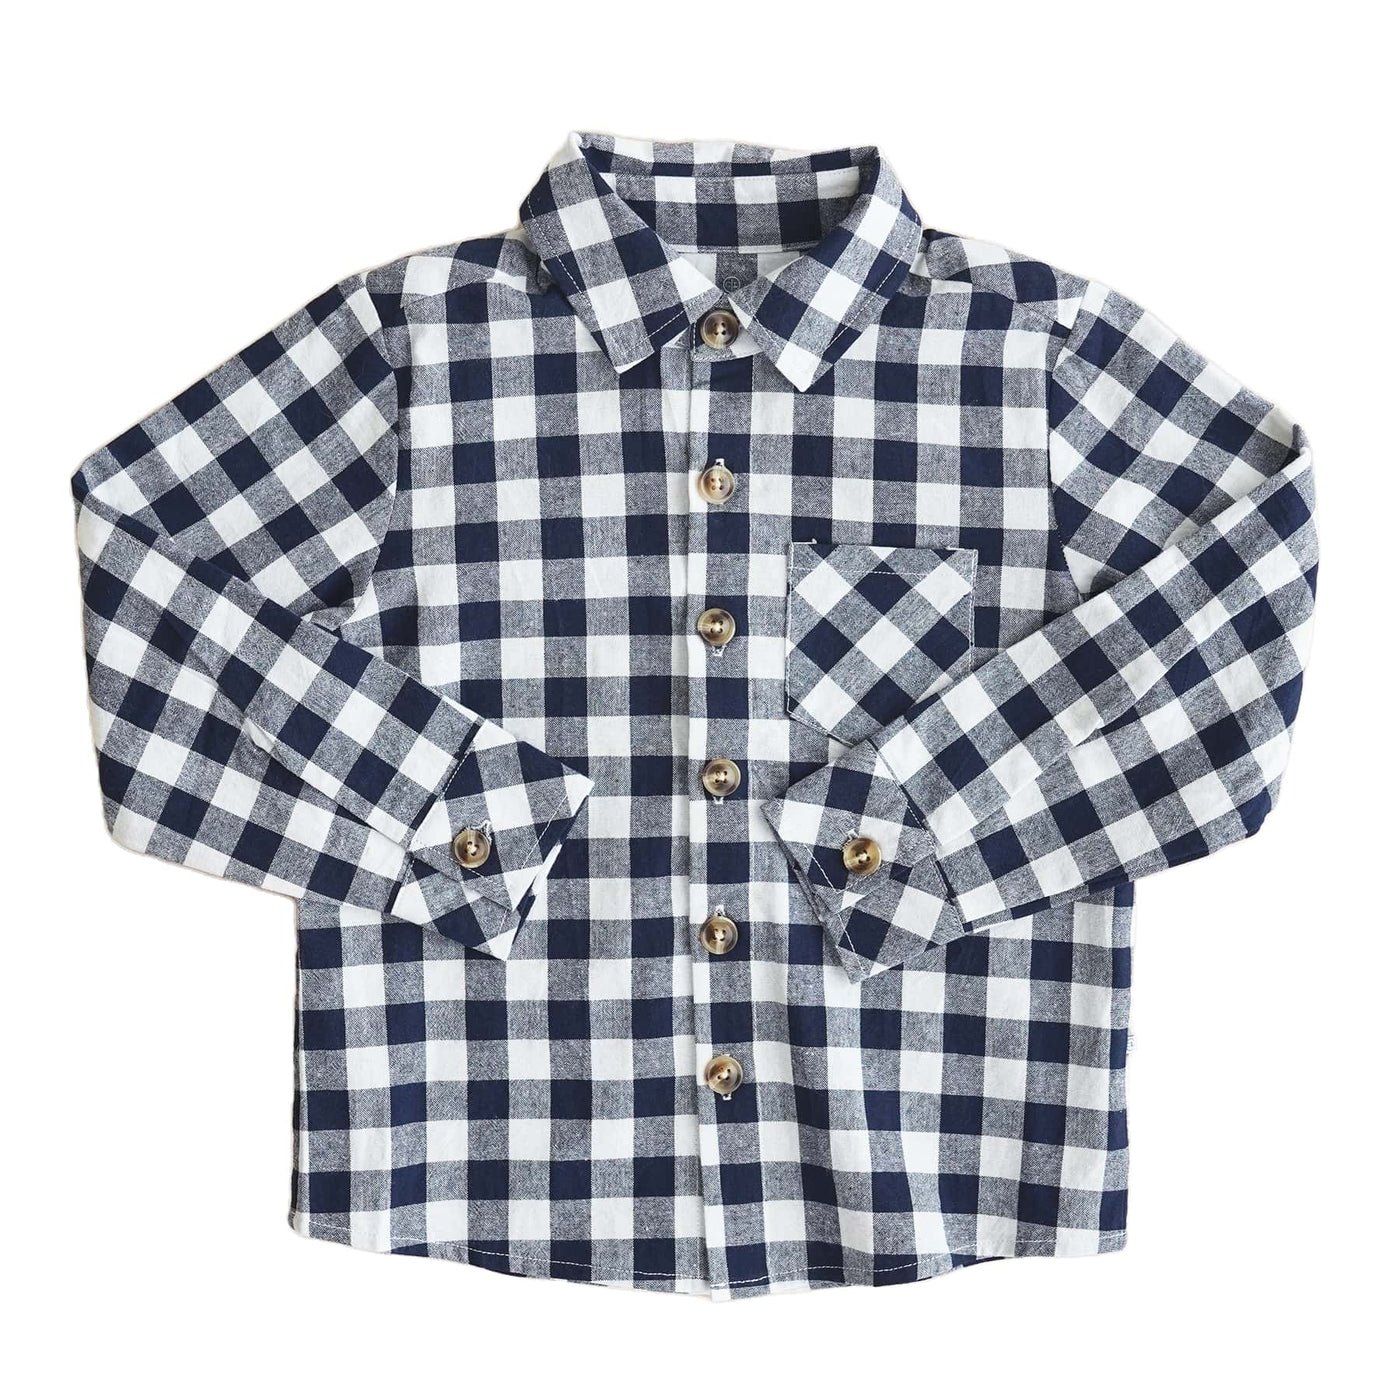 button down shirt for boys navy gingham